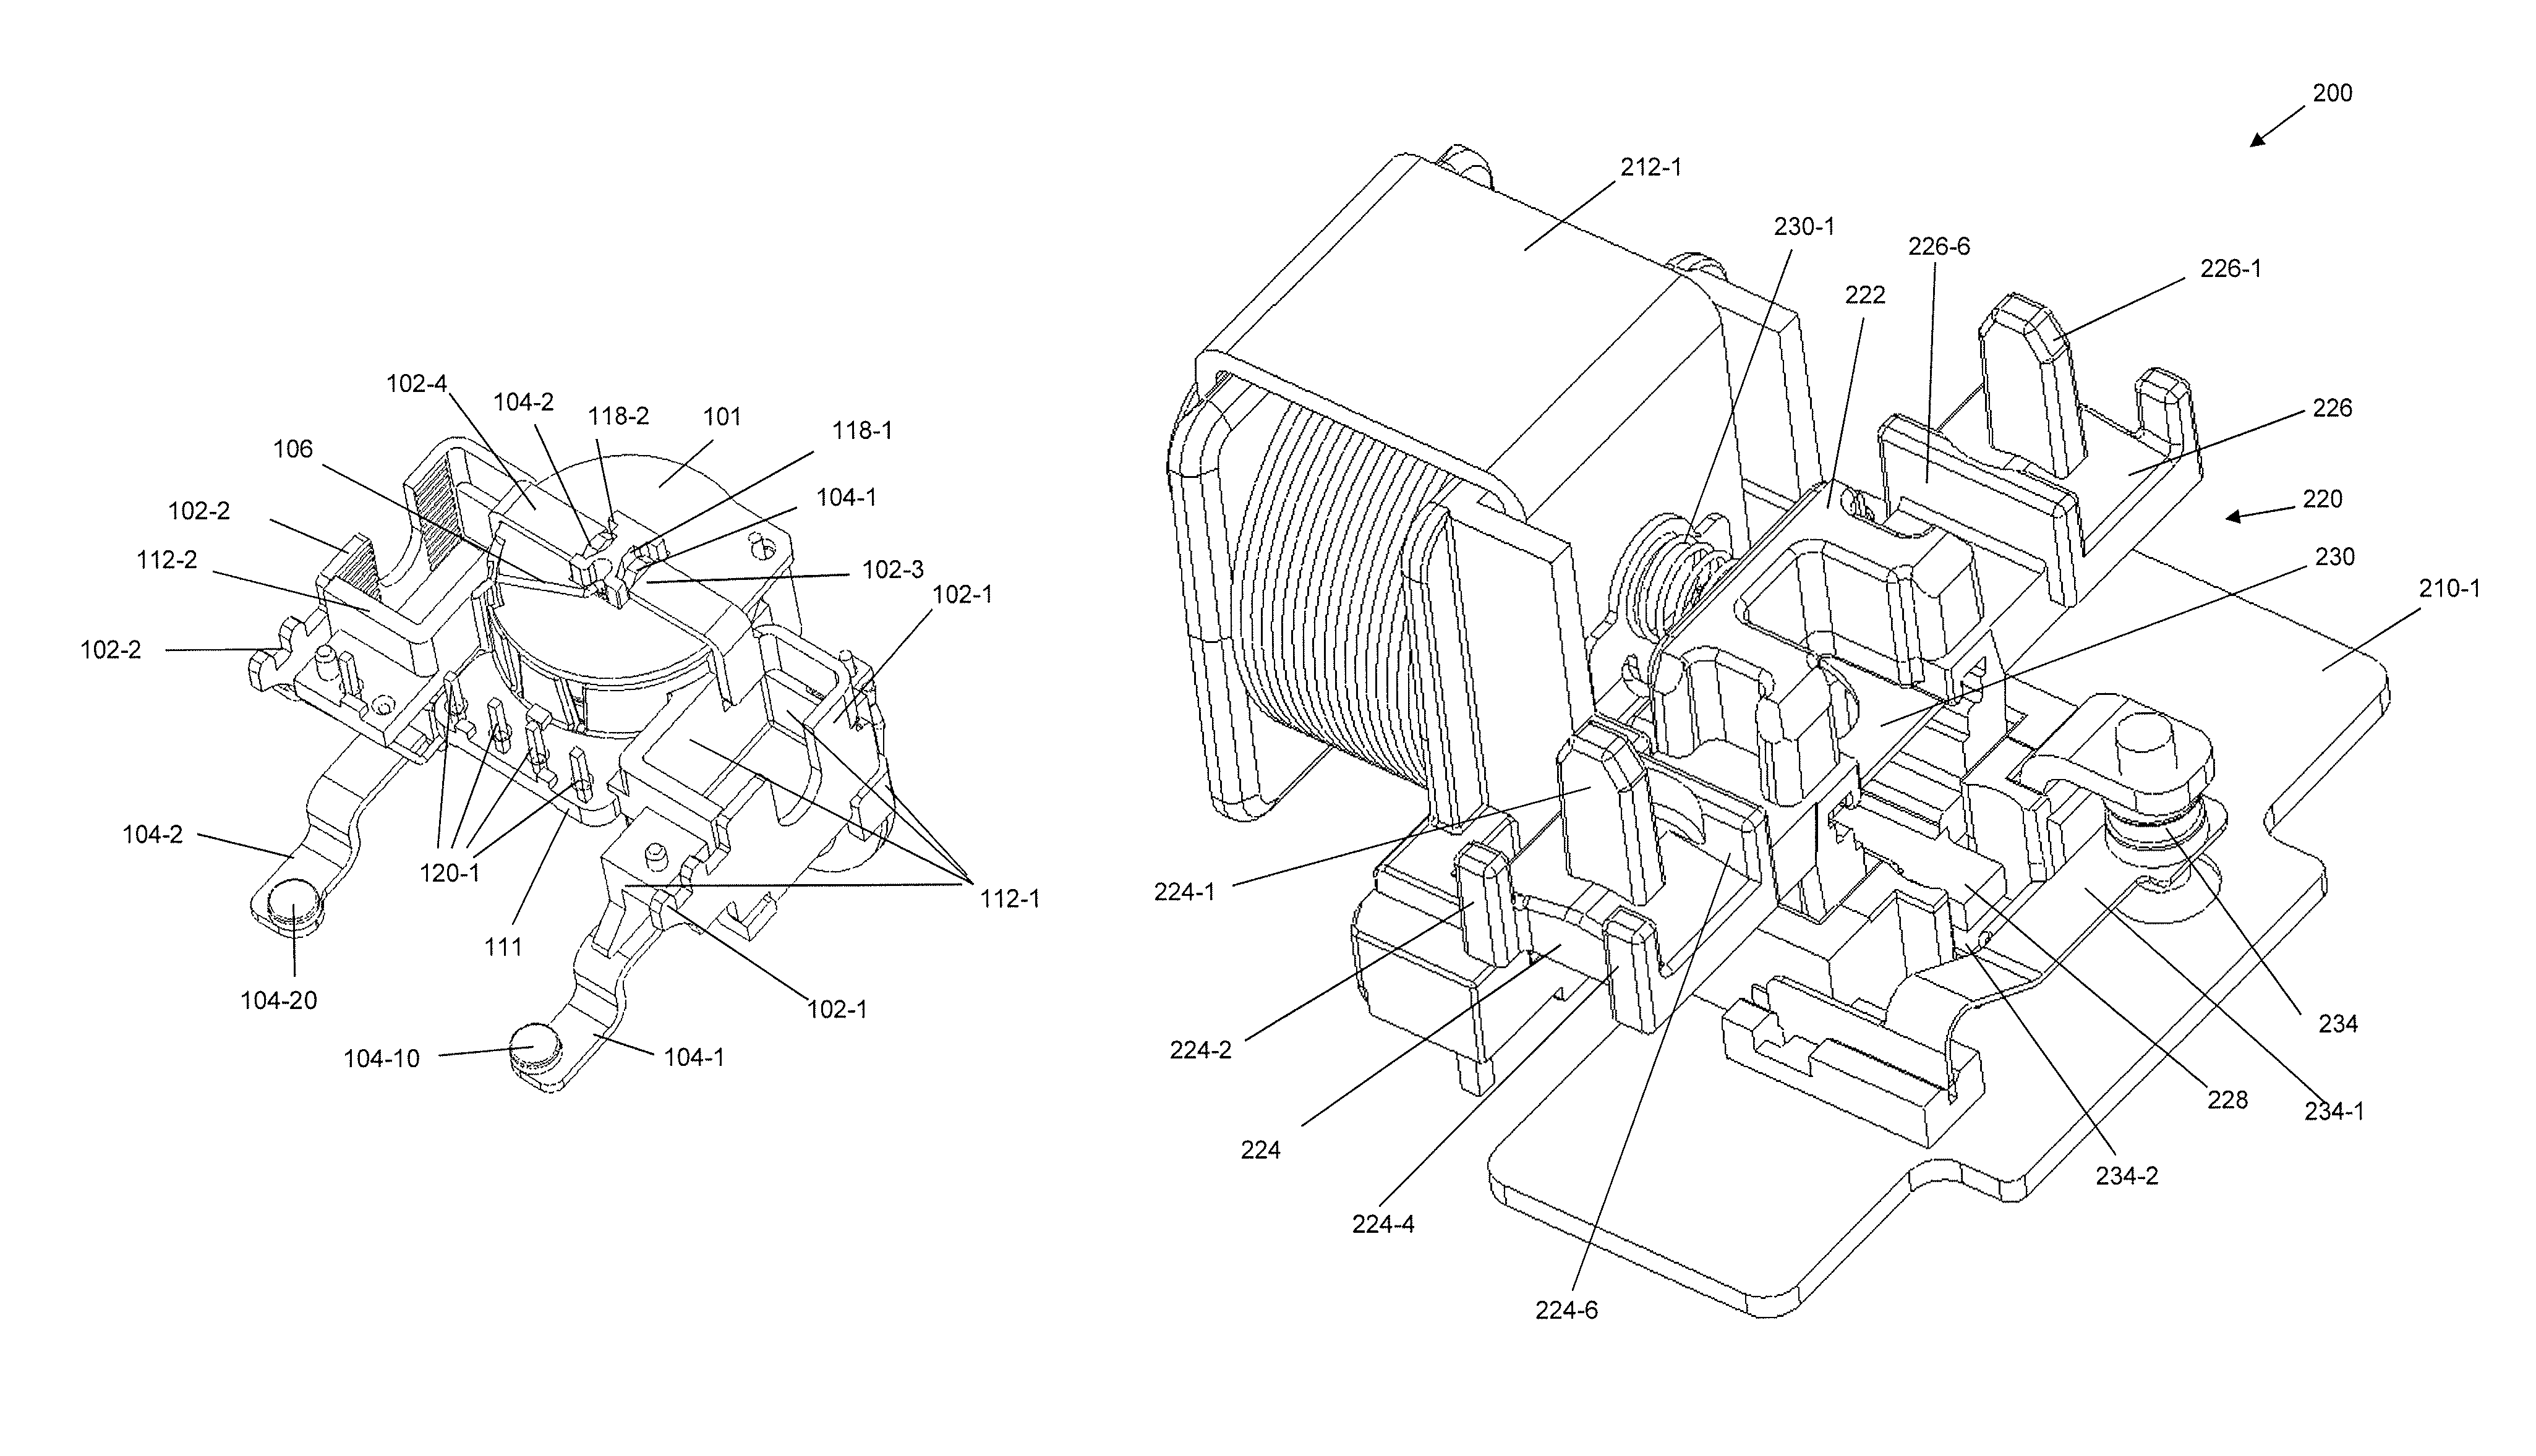 Protective wiring device